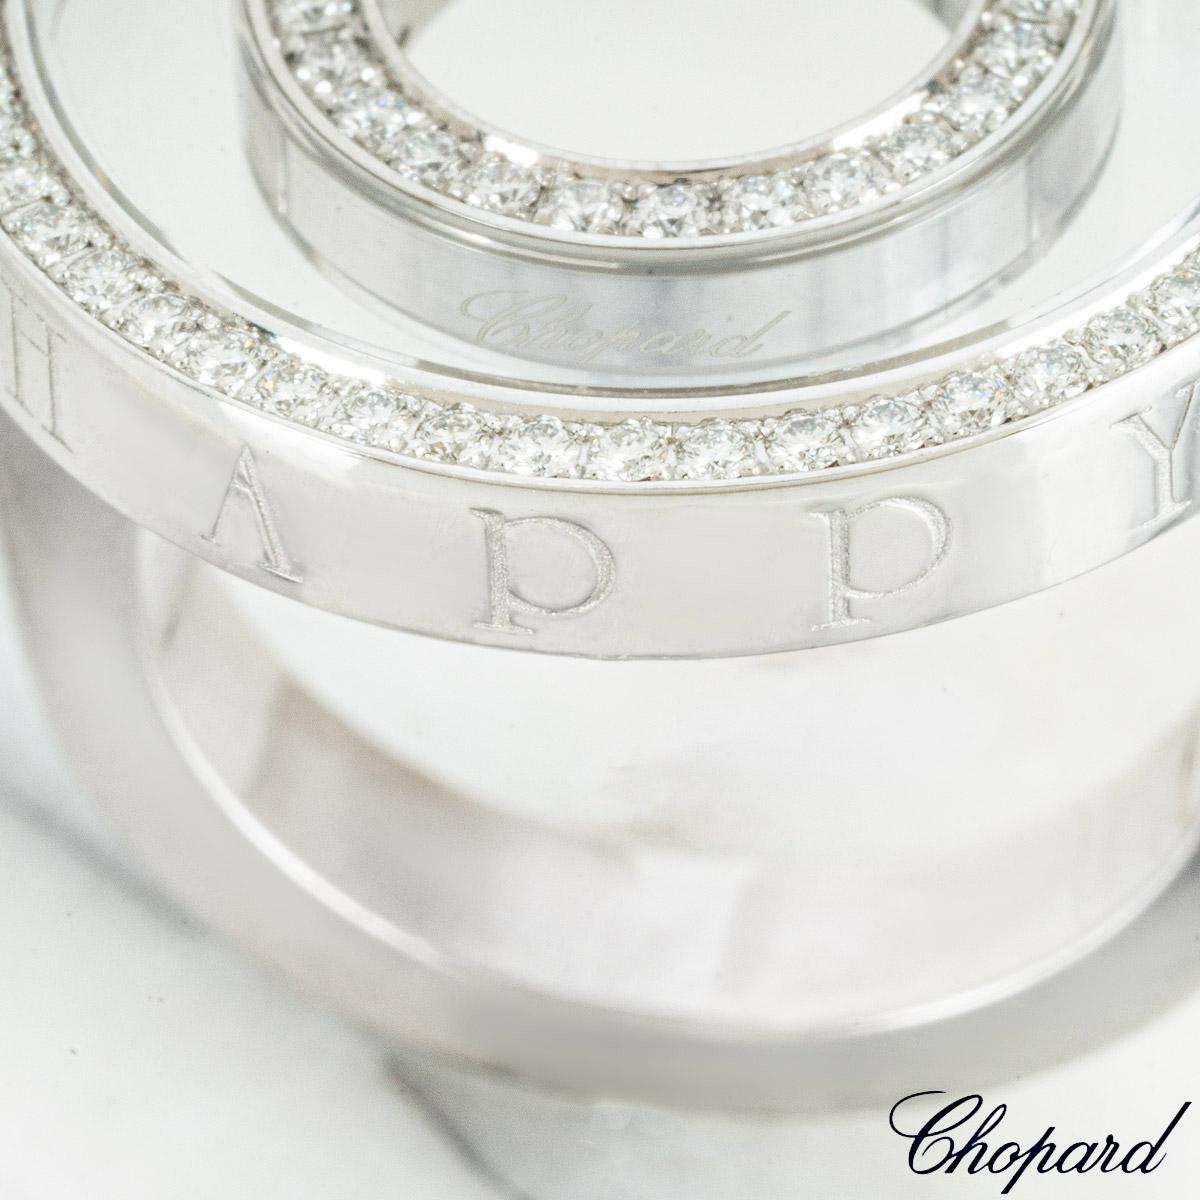 Chopard White Gold Happy Diamonds Ring 82/6244-020 In Excellent Condition For Sale In London, GB